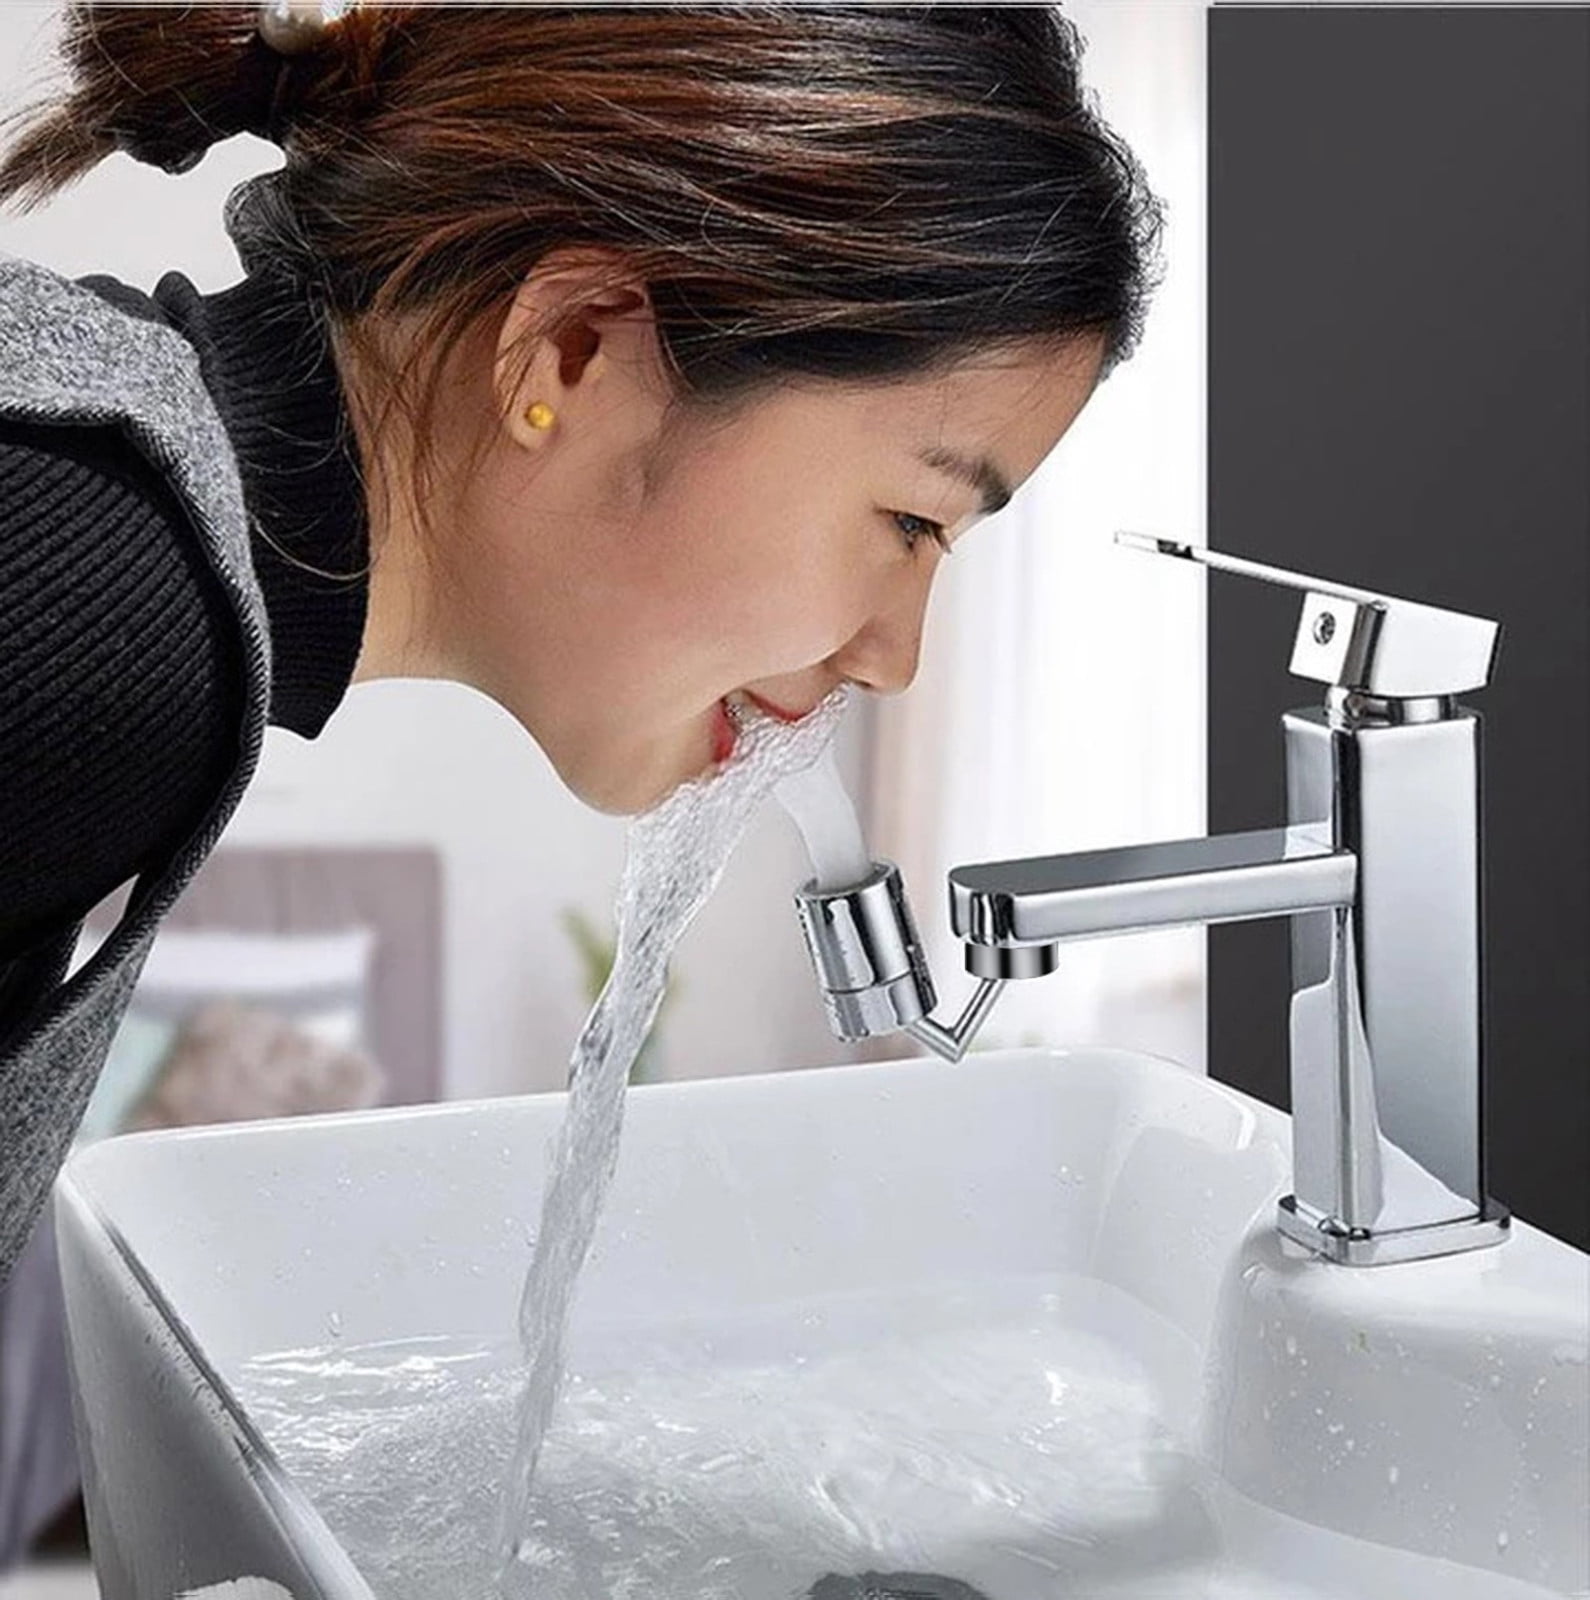 Swivel 720° Faucet Sprayer Head and Water Saving Universal Splash Filter Faucet Four-Layer net Filter to Remove impurities 1 with Durable Copper & ABS and Double O-Ring Valves 